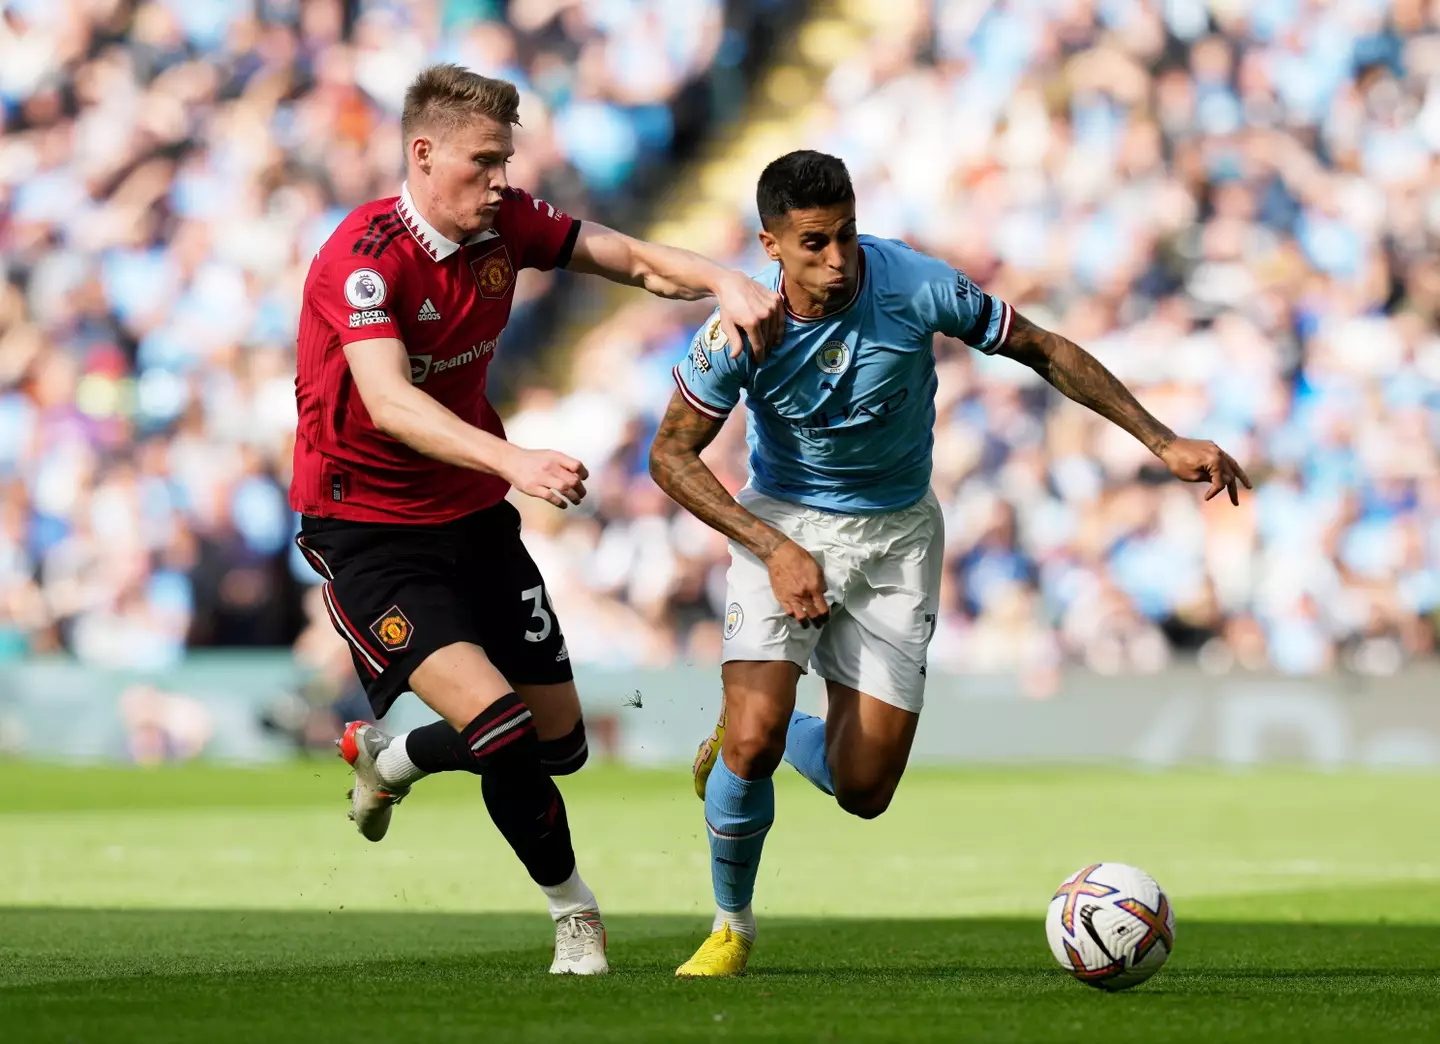 Scott McTominay and Joao Cancelo battle for the ball. (Image